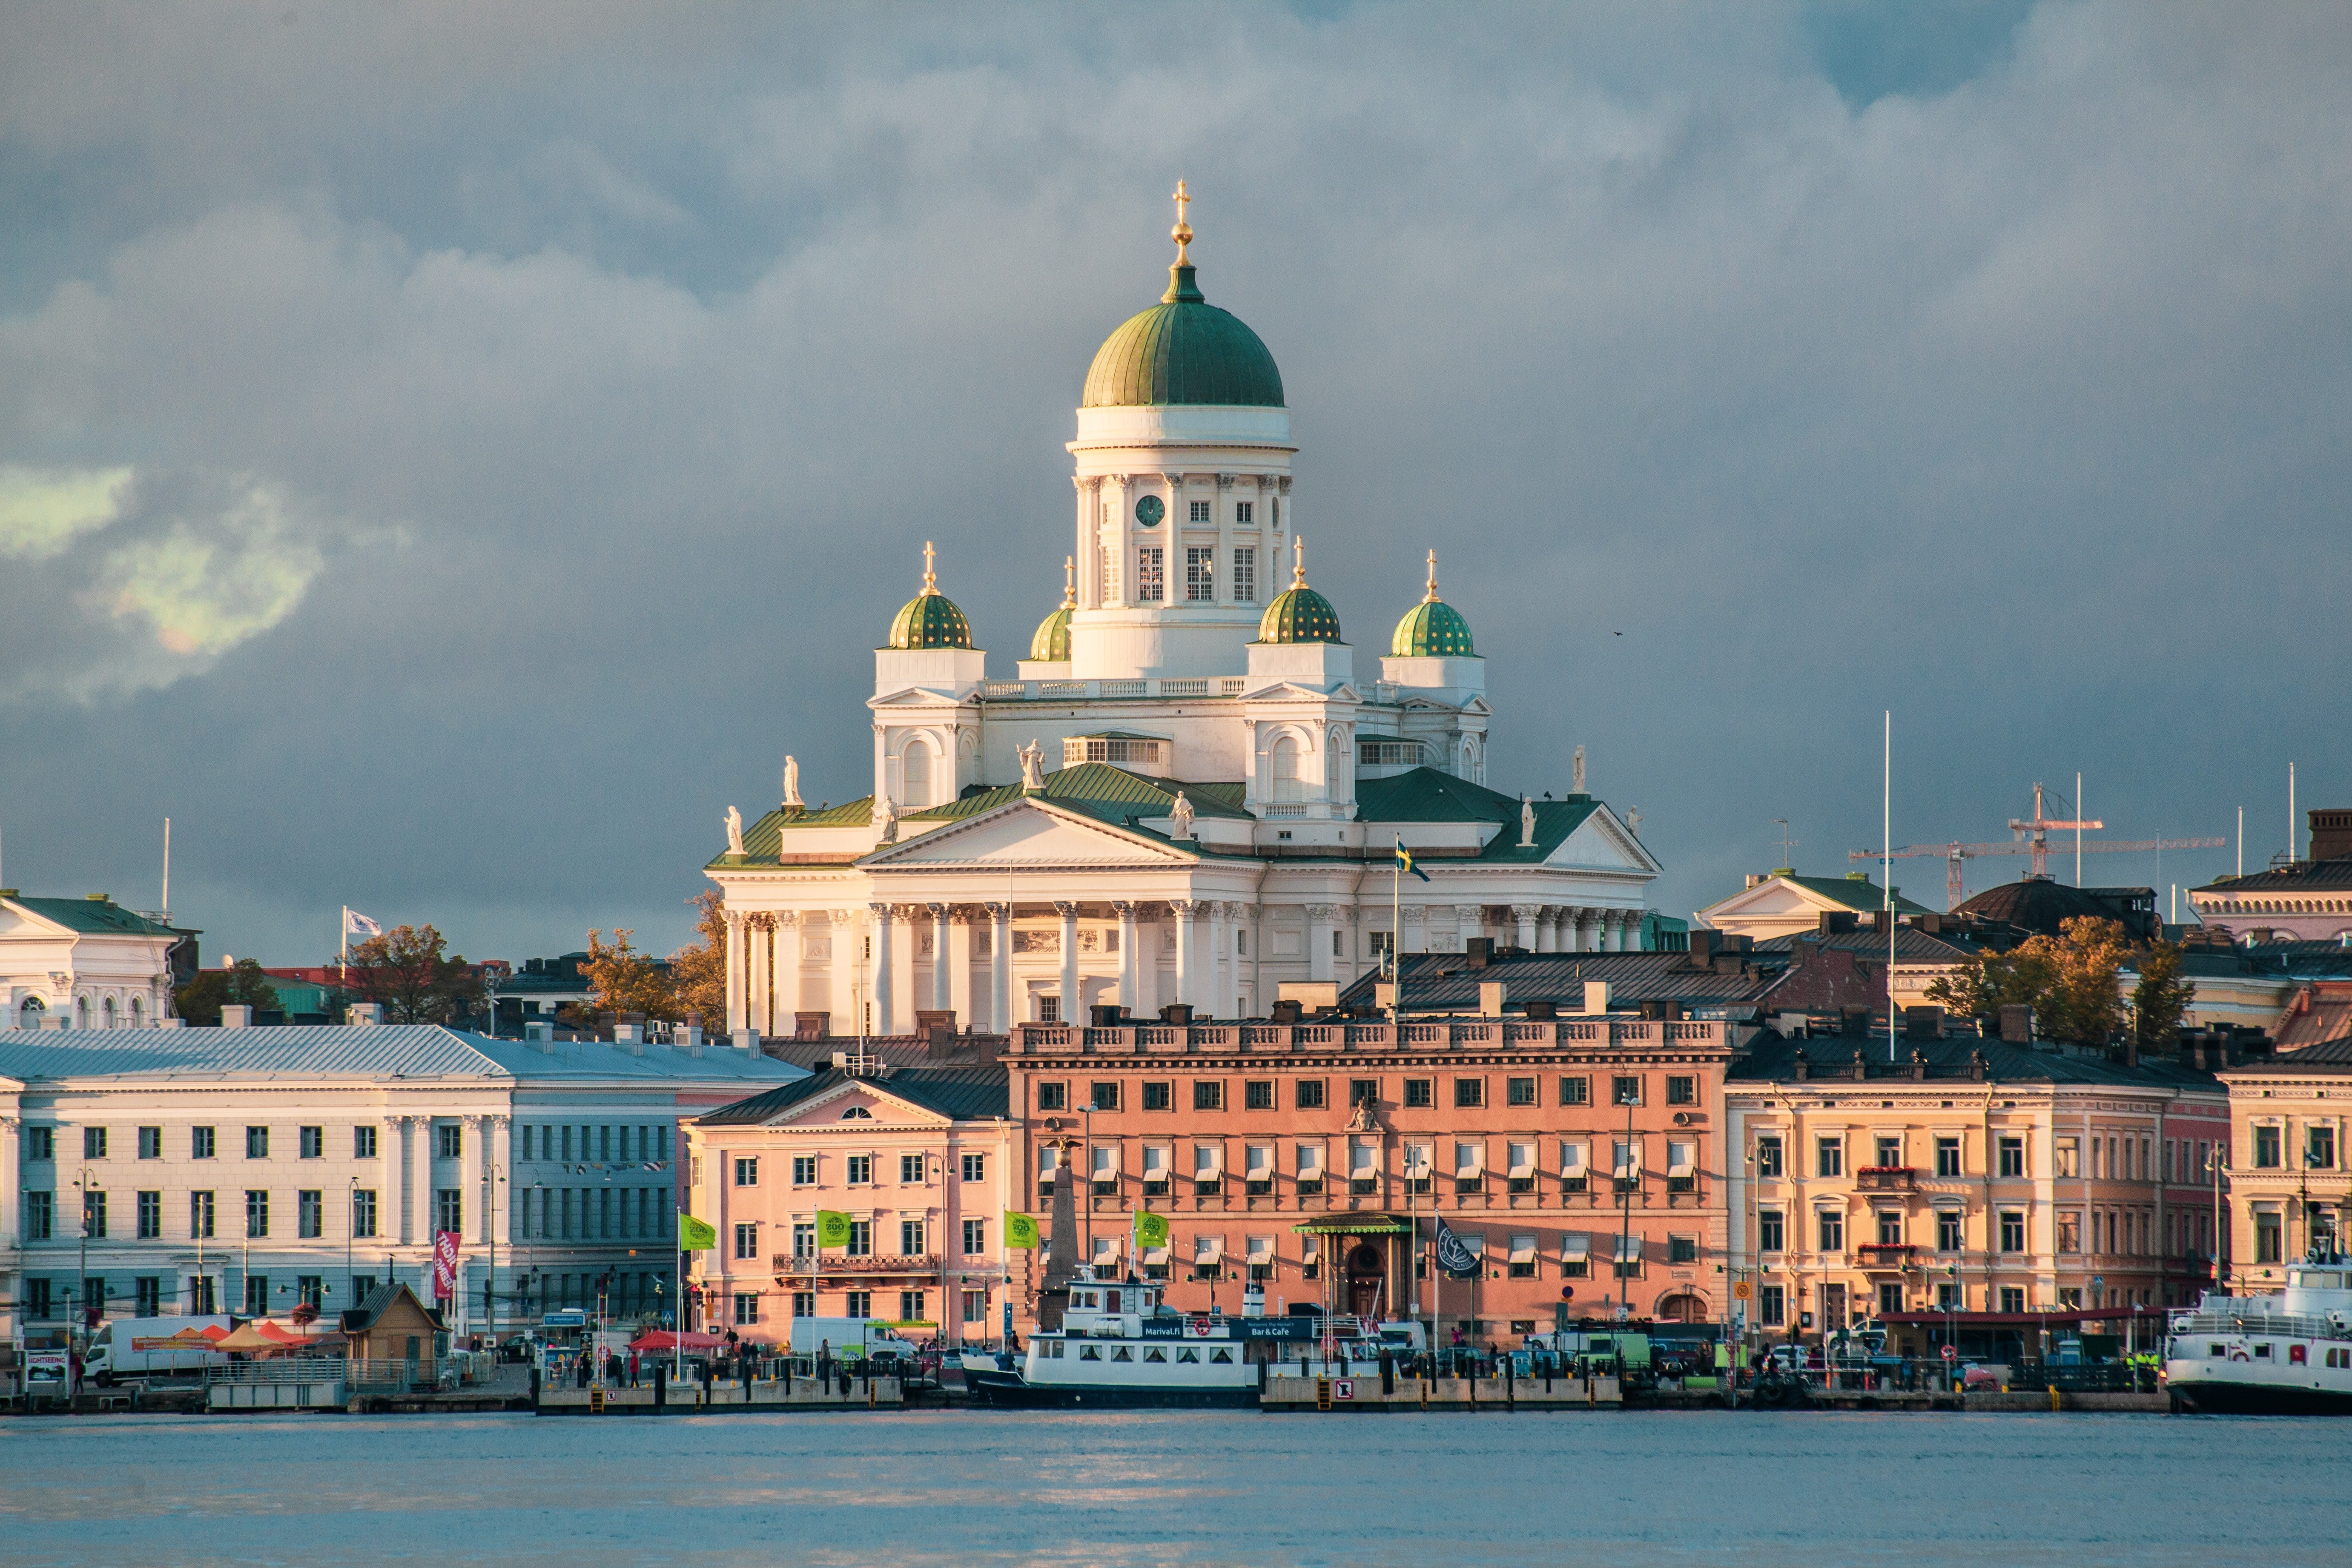 Helsinki city with the white cathedral. Scandinavia road trips